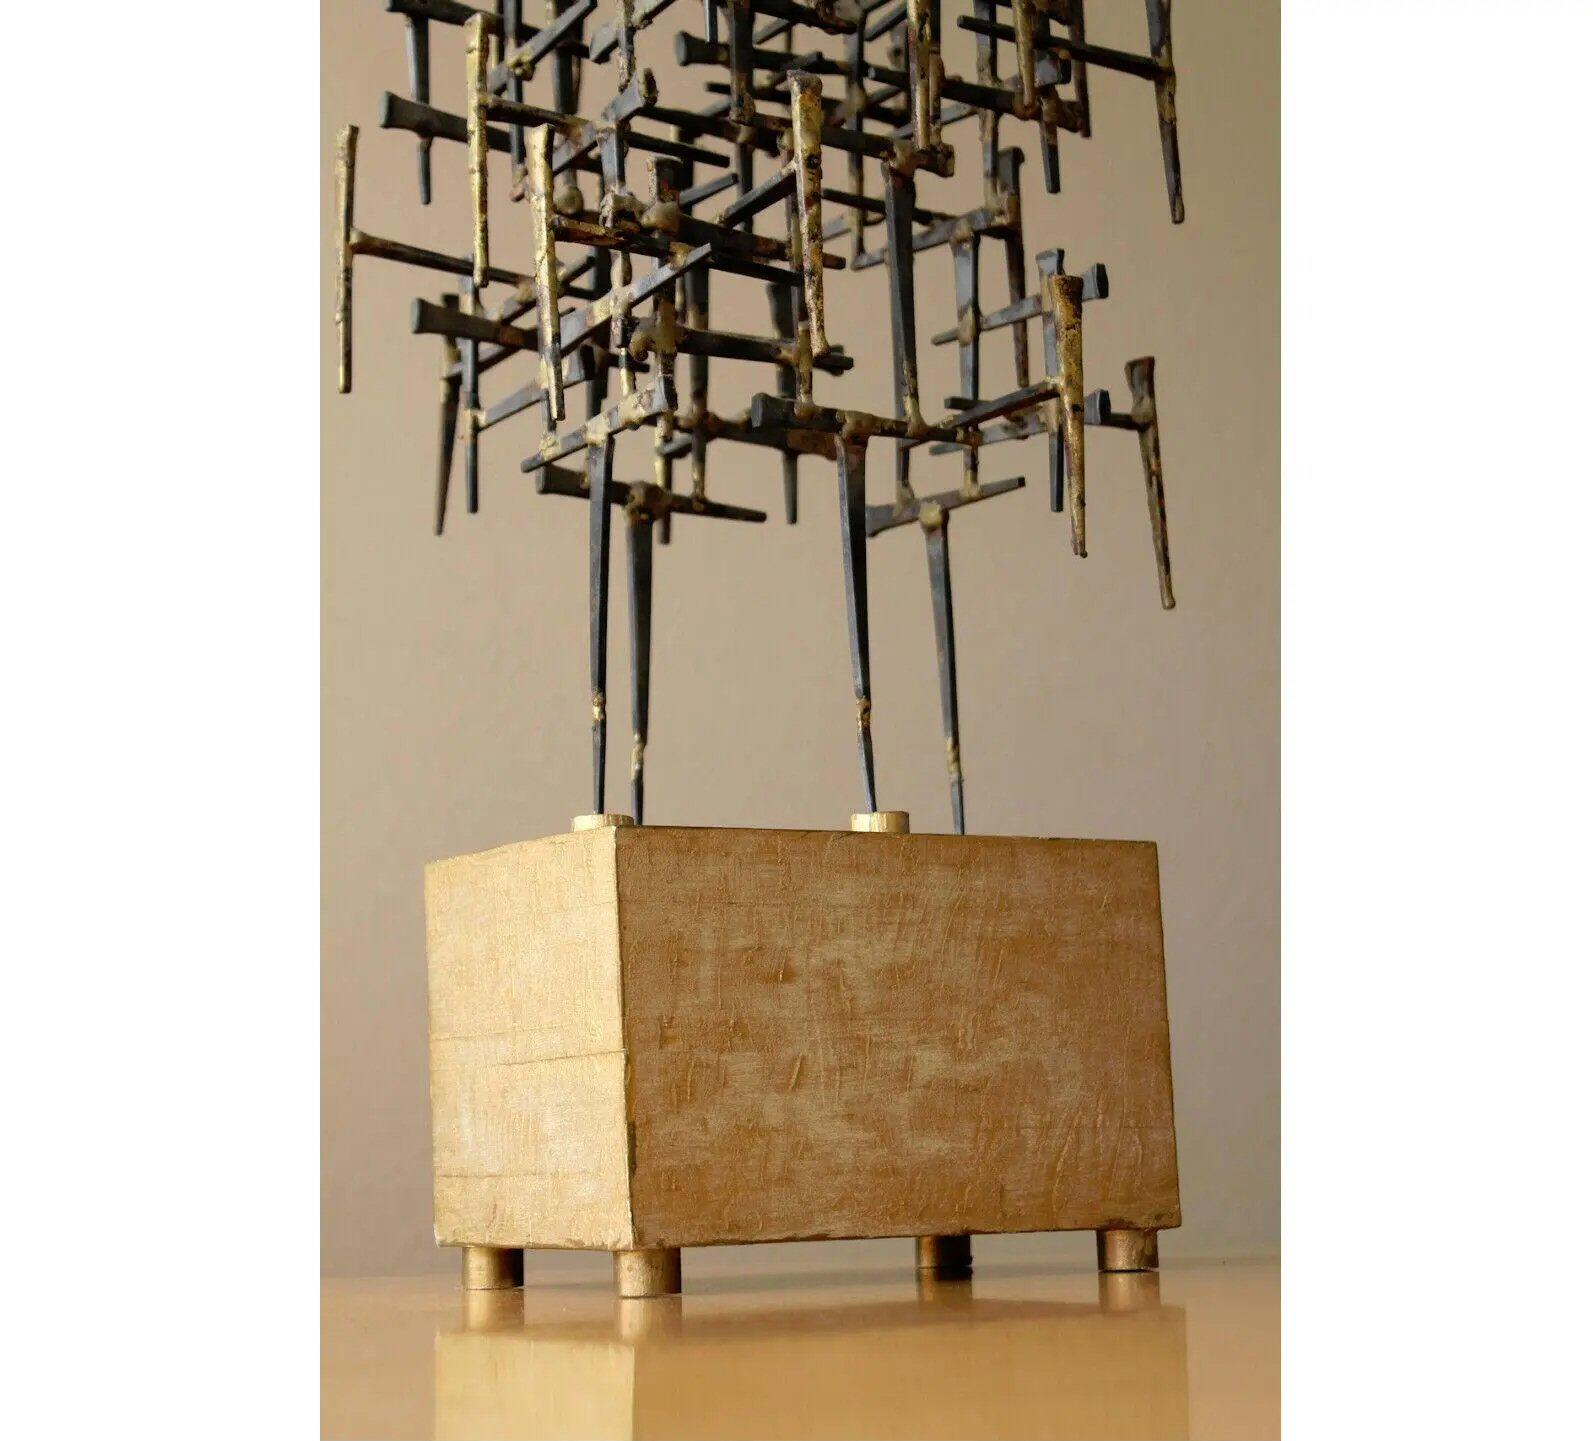 Hand-Crafted Original 1950s Mid Century Brutalist Abstract Metal Modern Art Sculpture For Sale